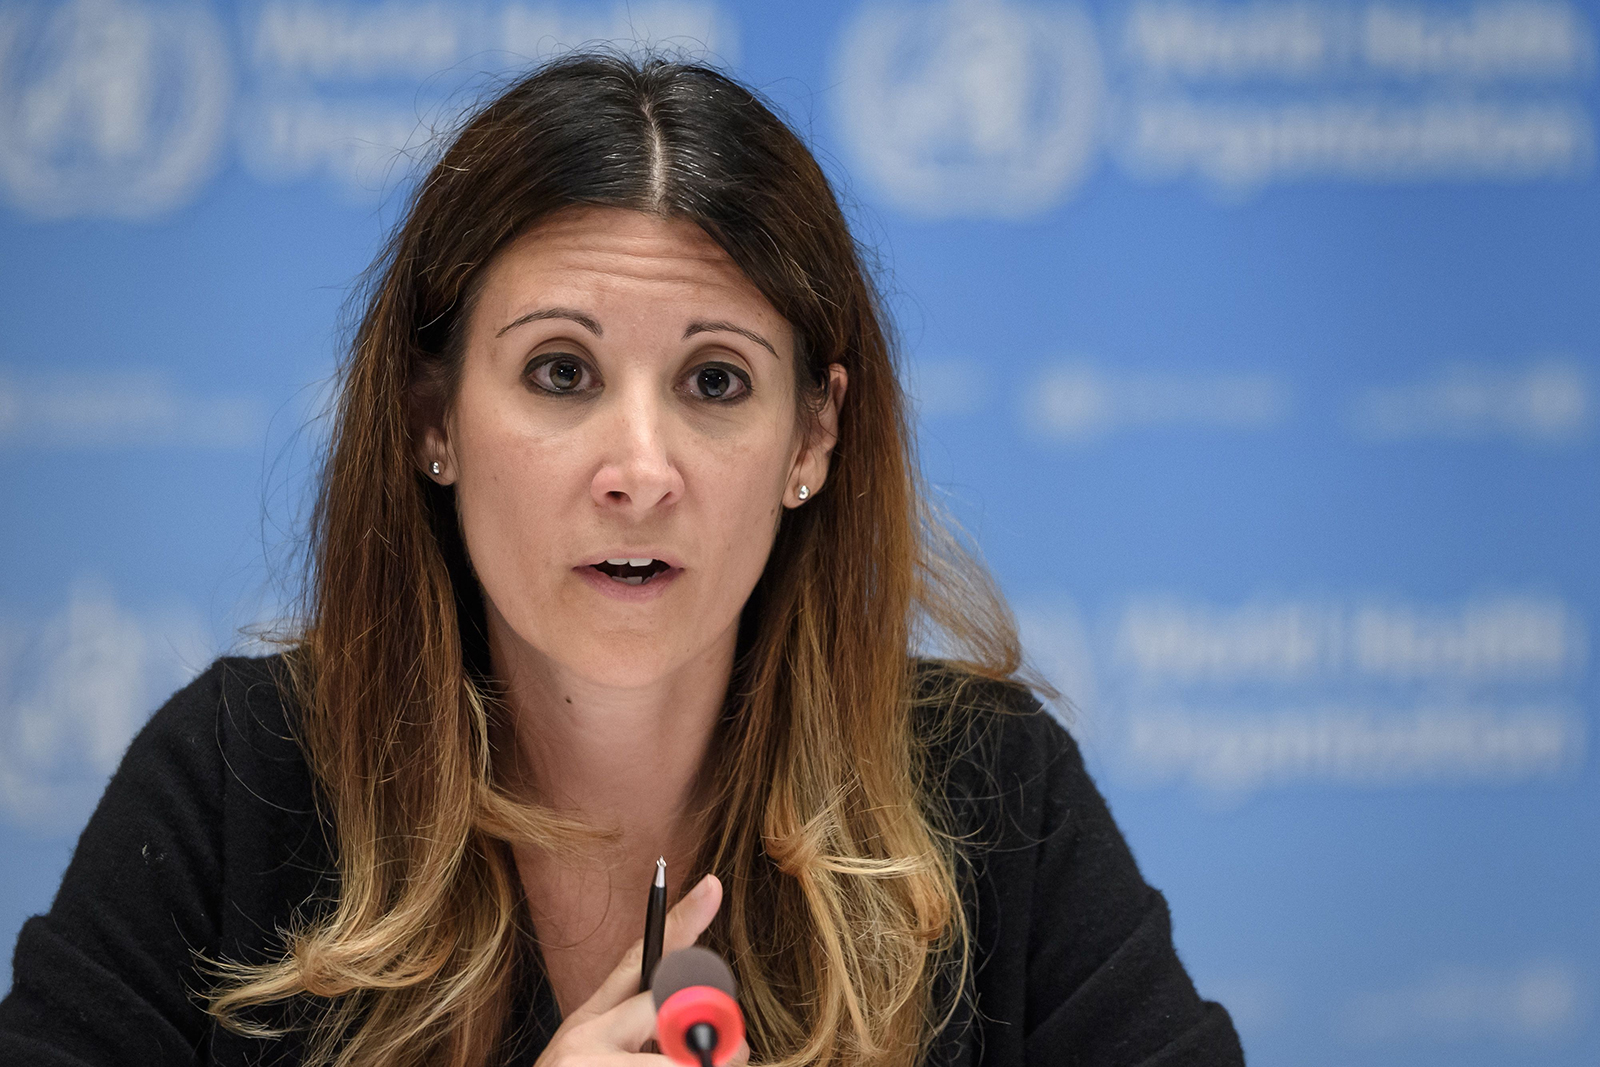 Technical lead head for Covid-19 Maria Van Kerkhove attends a press conference at the WHO headquarters in Geneva, Switzerland on July 3.